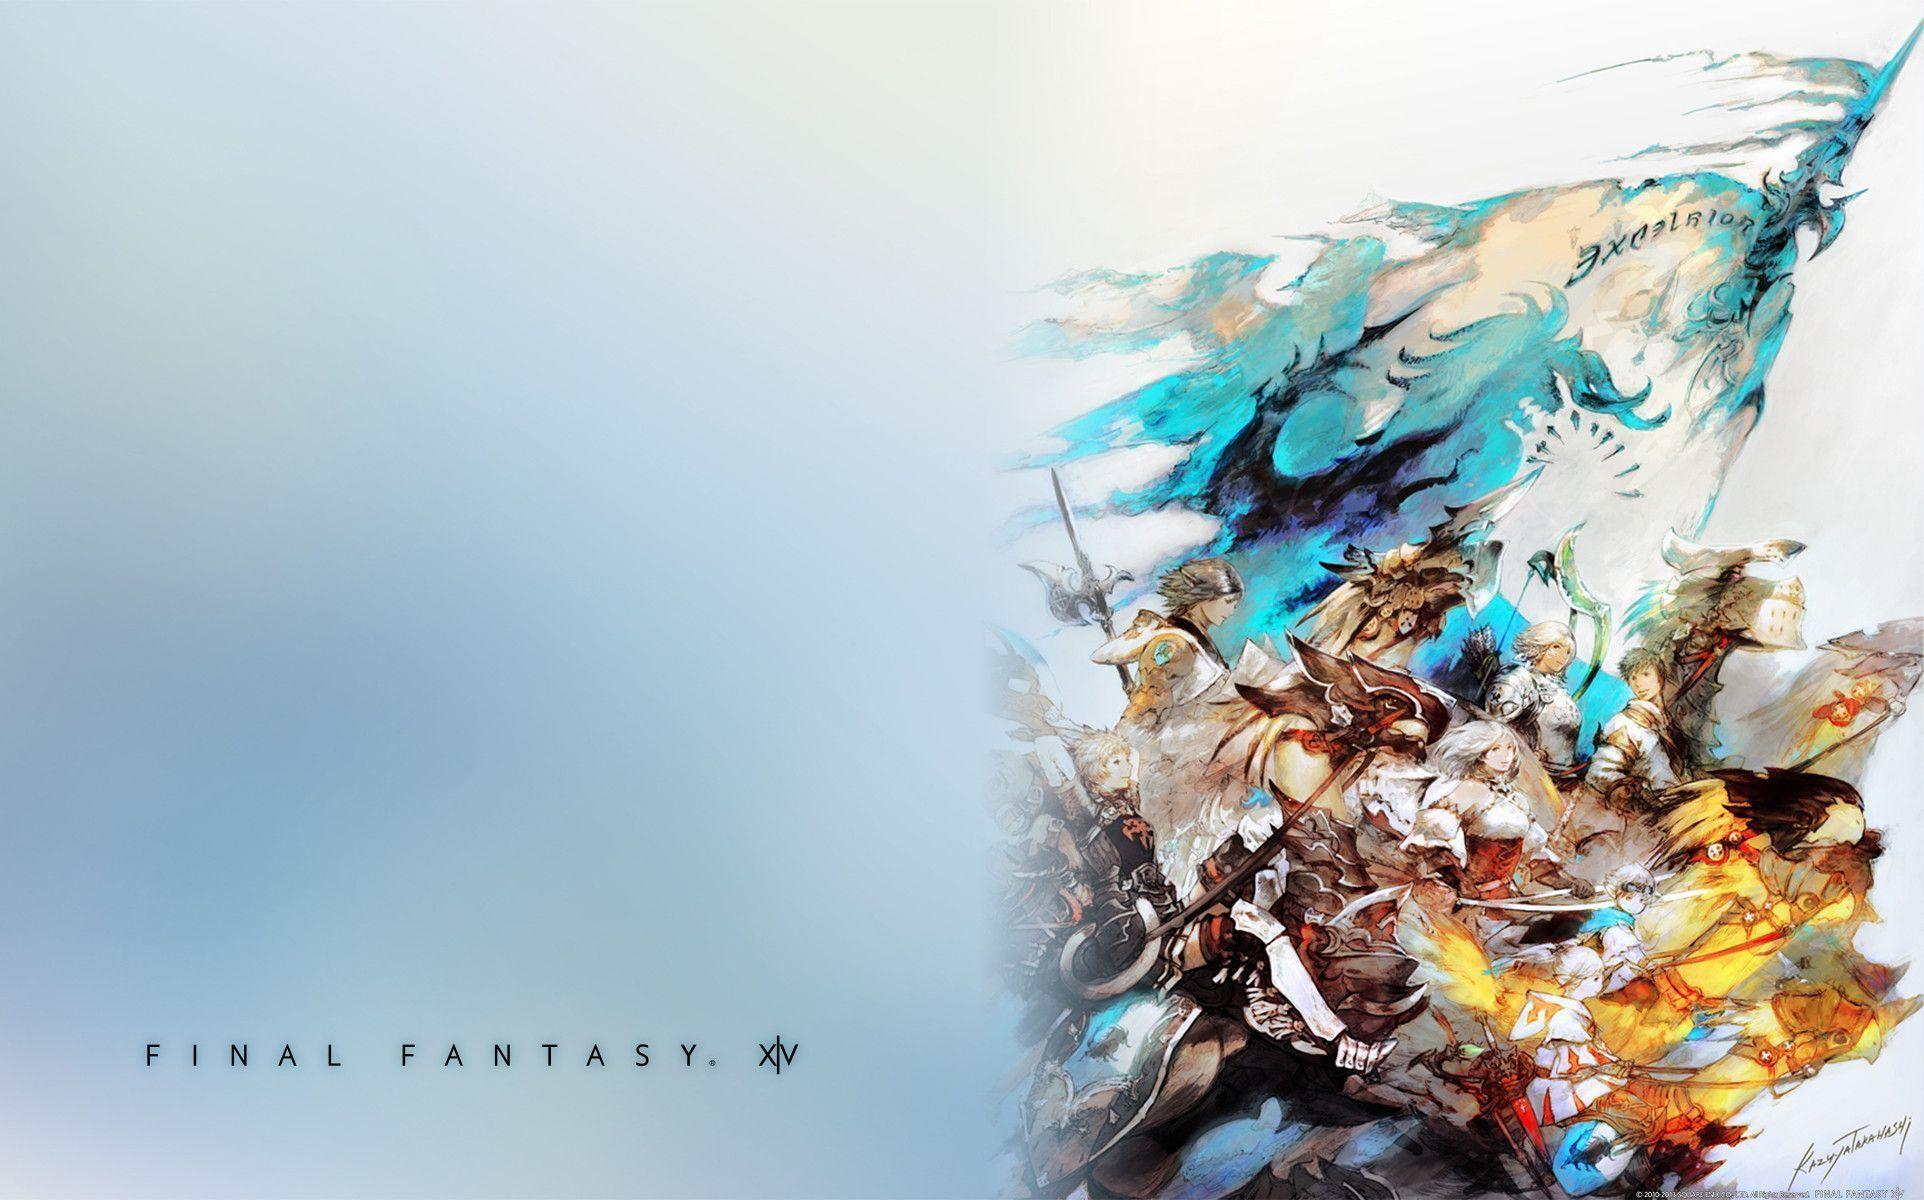 Official Final Fantasy XIV Themes Wallpaper Released For PC